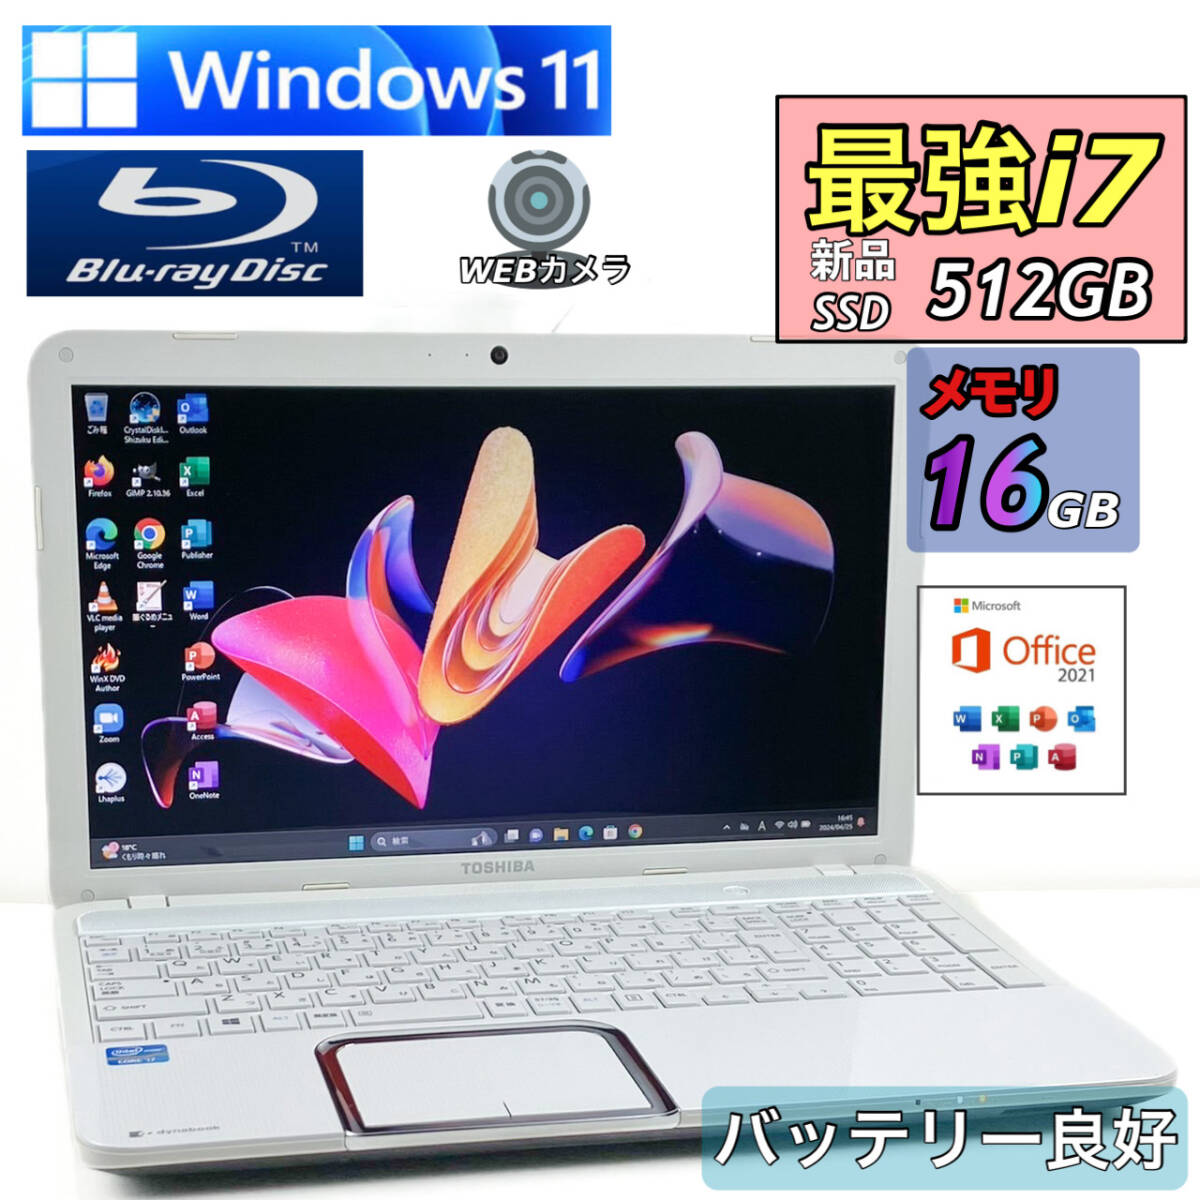  beautiful goods * strongest i7[ memory 16GB+ new goods SSD512GB/Core i7-3.40GHz]Windows11/Office2021/ popular Toshiba laptop /Blu-ray/USB3.0/ battery replaced 